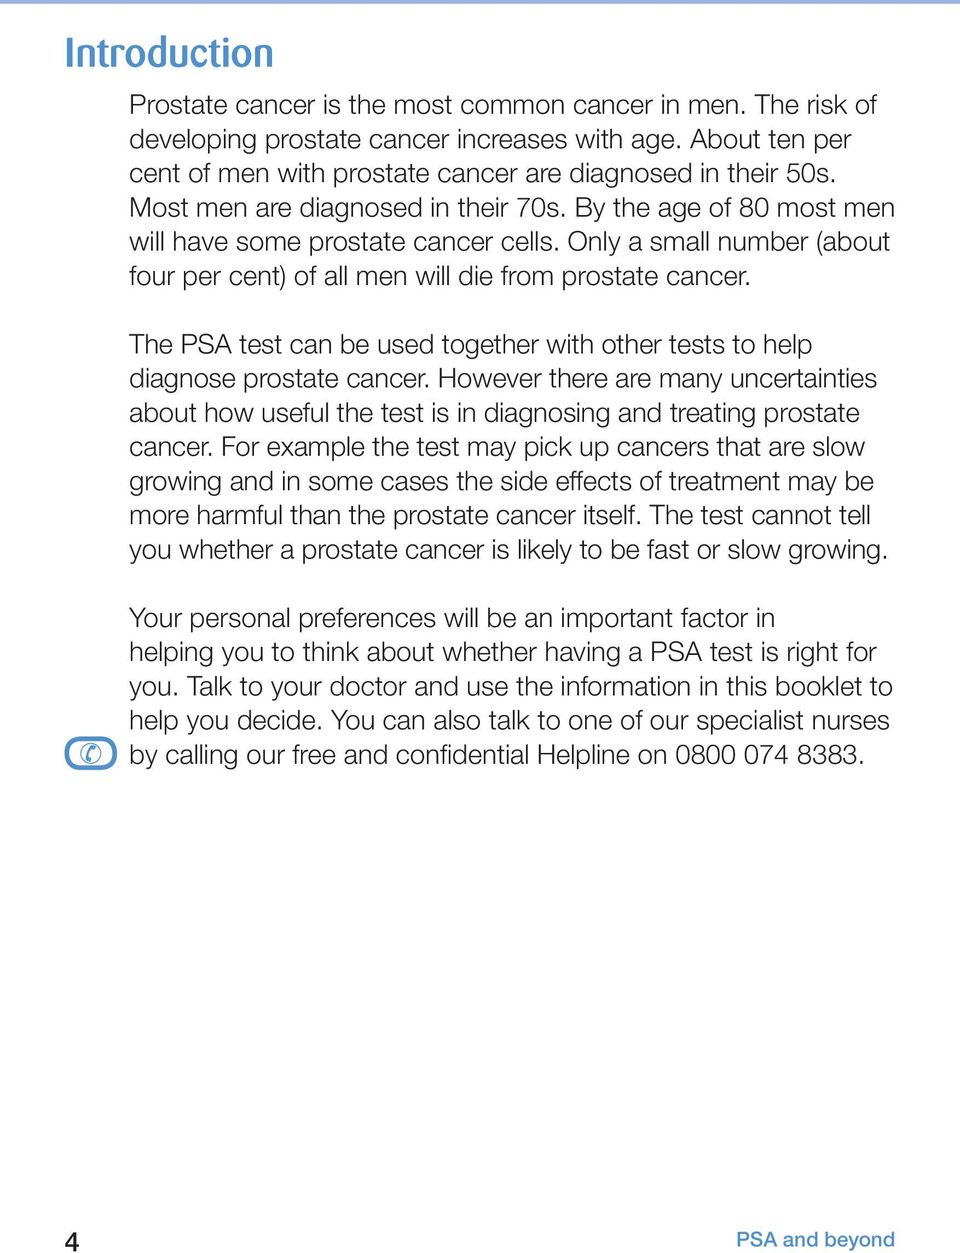 The PSA test can be used together with other tests to help diagnose prostate cancer. However there are many uncertainties about how useful the test is in diagnosing and treating prostate cancer.